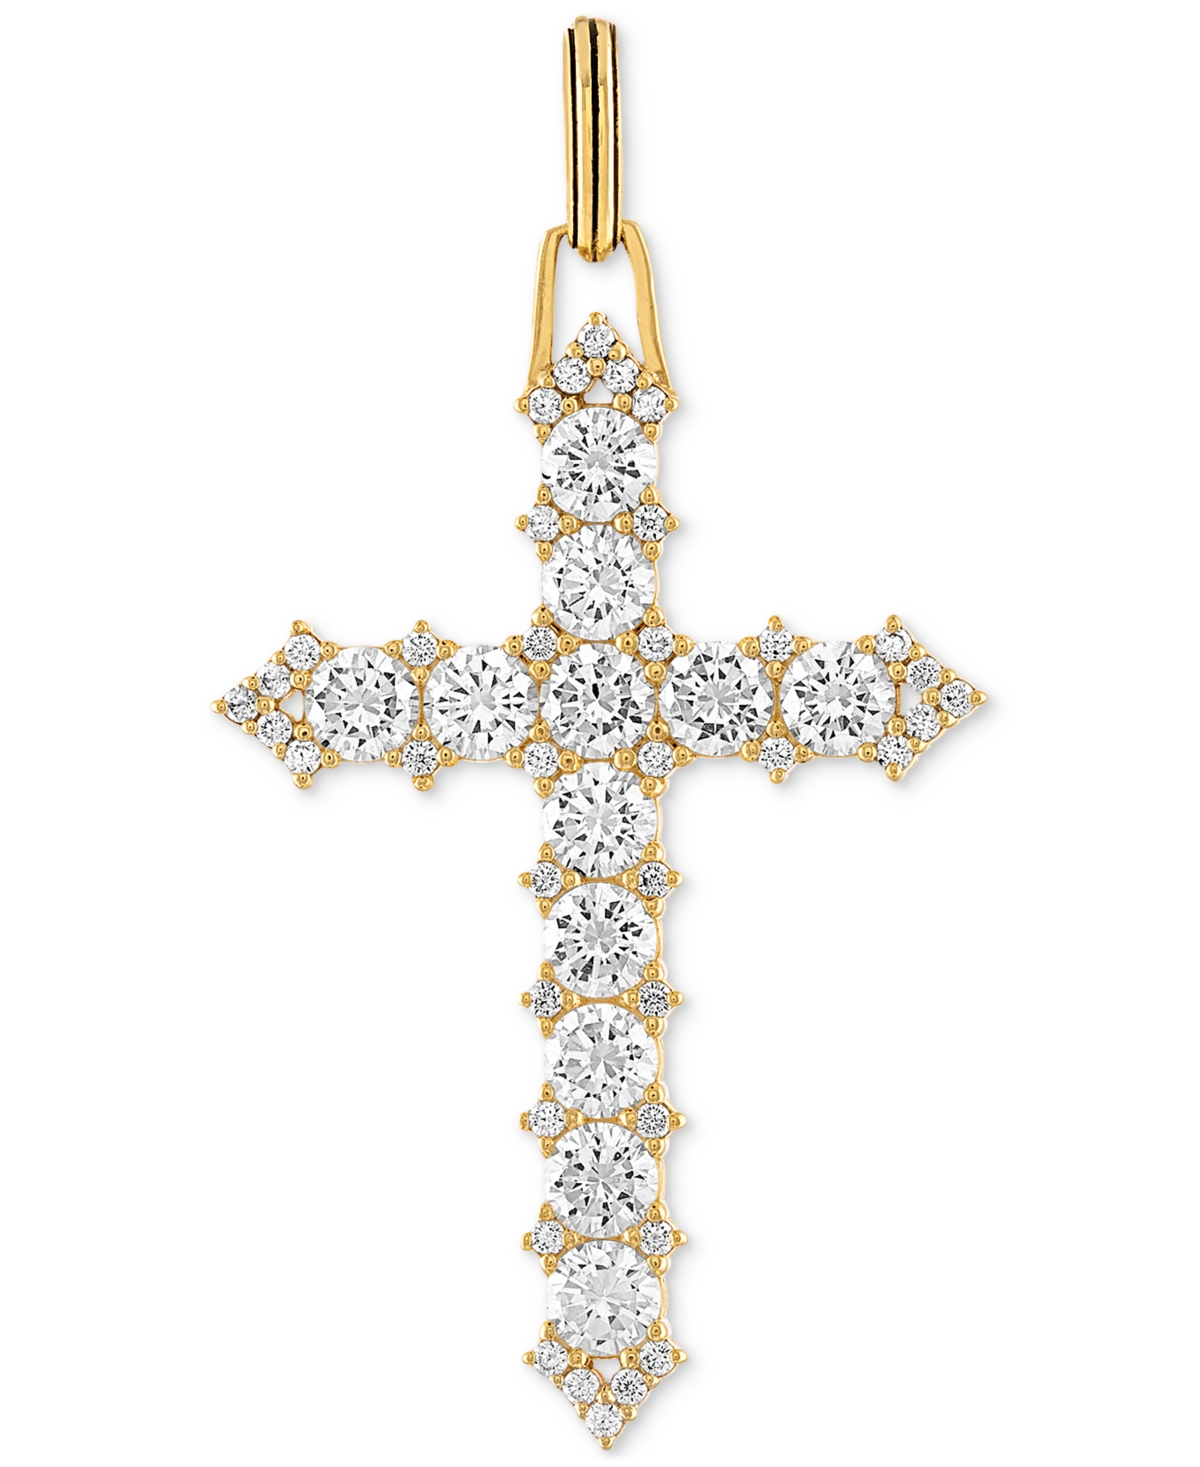 Cubic Zirconia Cross Pendant in 14k Gold-Plated Sterling Silver, Created for Macy's - Gold Over Silver